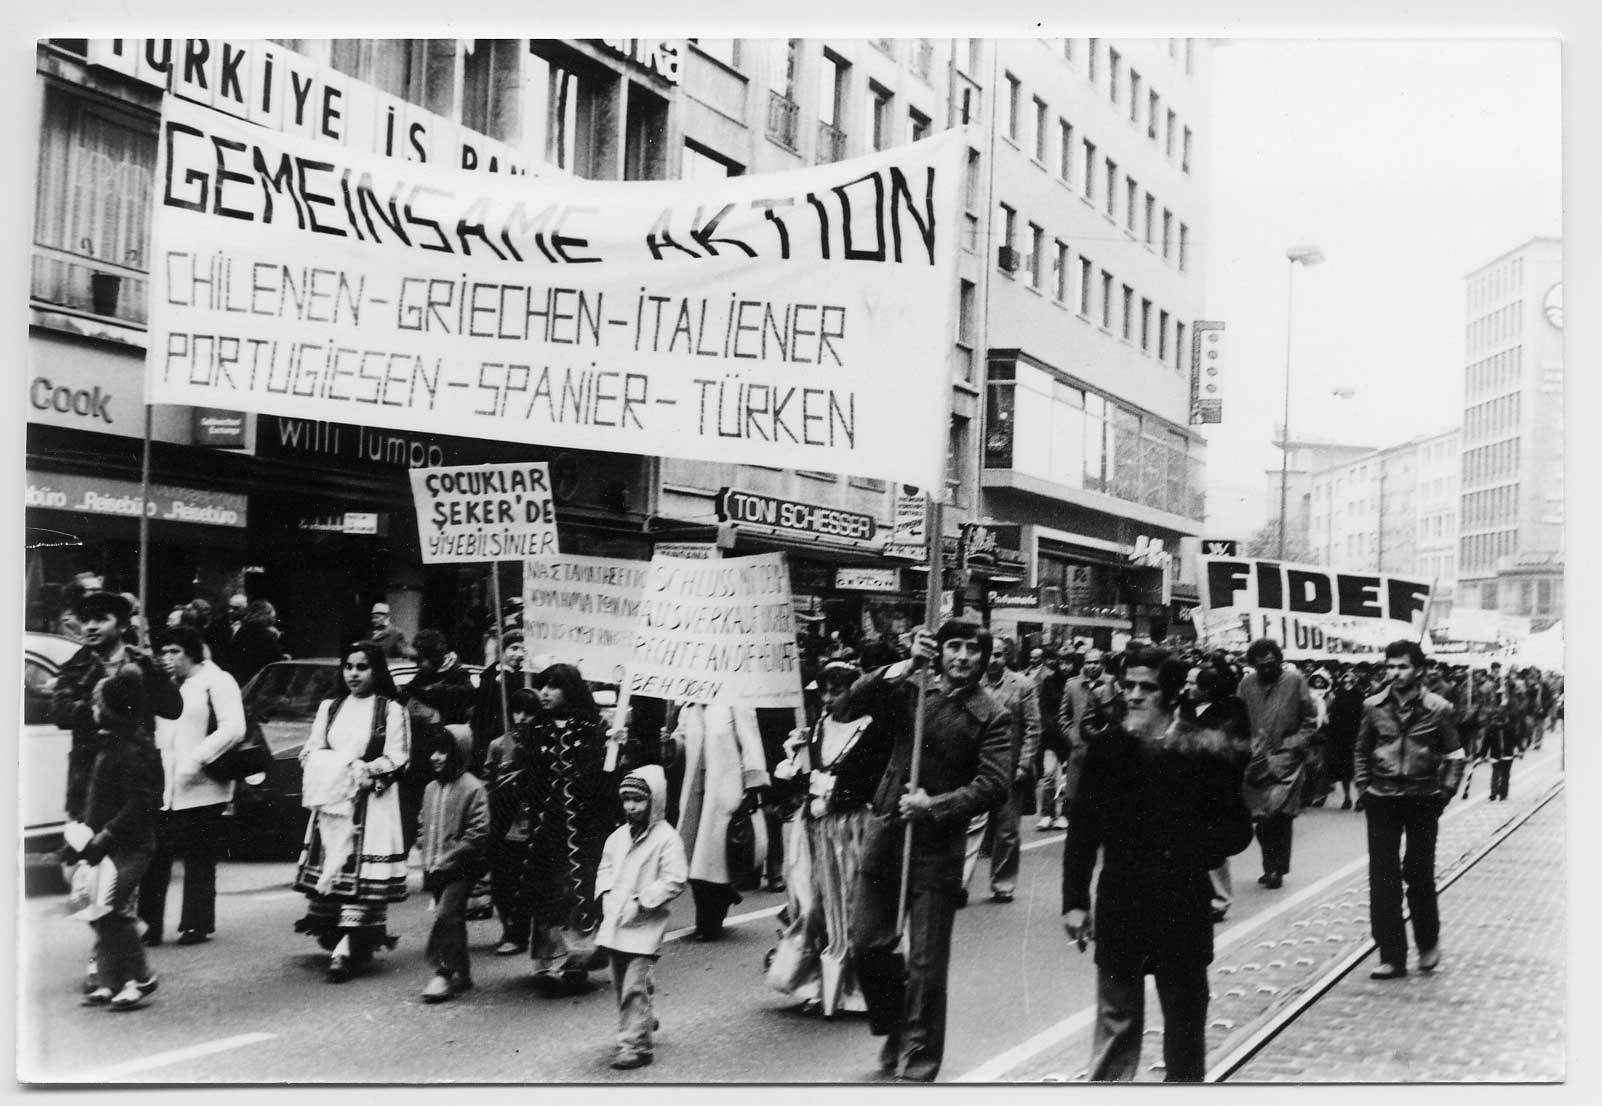 2004: The conception and realization of the photo exhibition "Shared Memories" about labor migration to Germany was developed in cooperation with the Federal Agency for Civic Education, the State Working Group of Municipal Migrant Representatives in North Rhine-Westphalia and the City of Cologne. The black-and-white photographs convey an impression of the working and living environment of former "guest workers" in Germany. The special feature: The photographs tell the story of the migrants from their own perspective. As a result, previously hidden sides of German immigration history also come to light. The first stop was the North Rhine-Westphalian state parliament in Düsseldorf in October. The exhibition has already been shown in 10 German cities. Photo: photographer unknown. We have made every effort to notify all copyright owners. Nevertheless, if individuals have not been notified, please contact us.